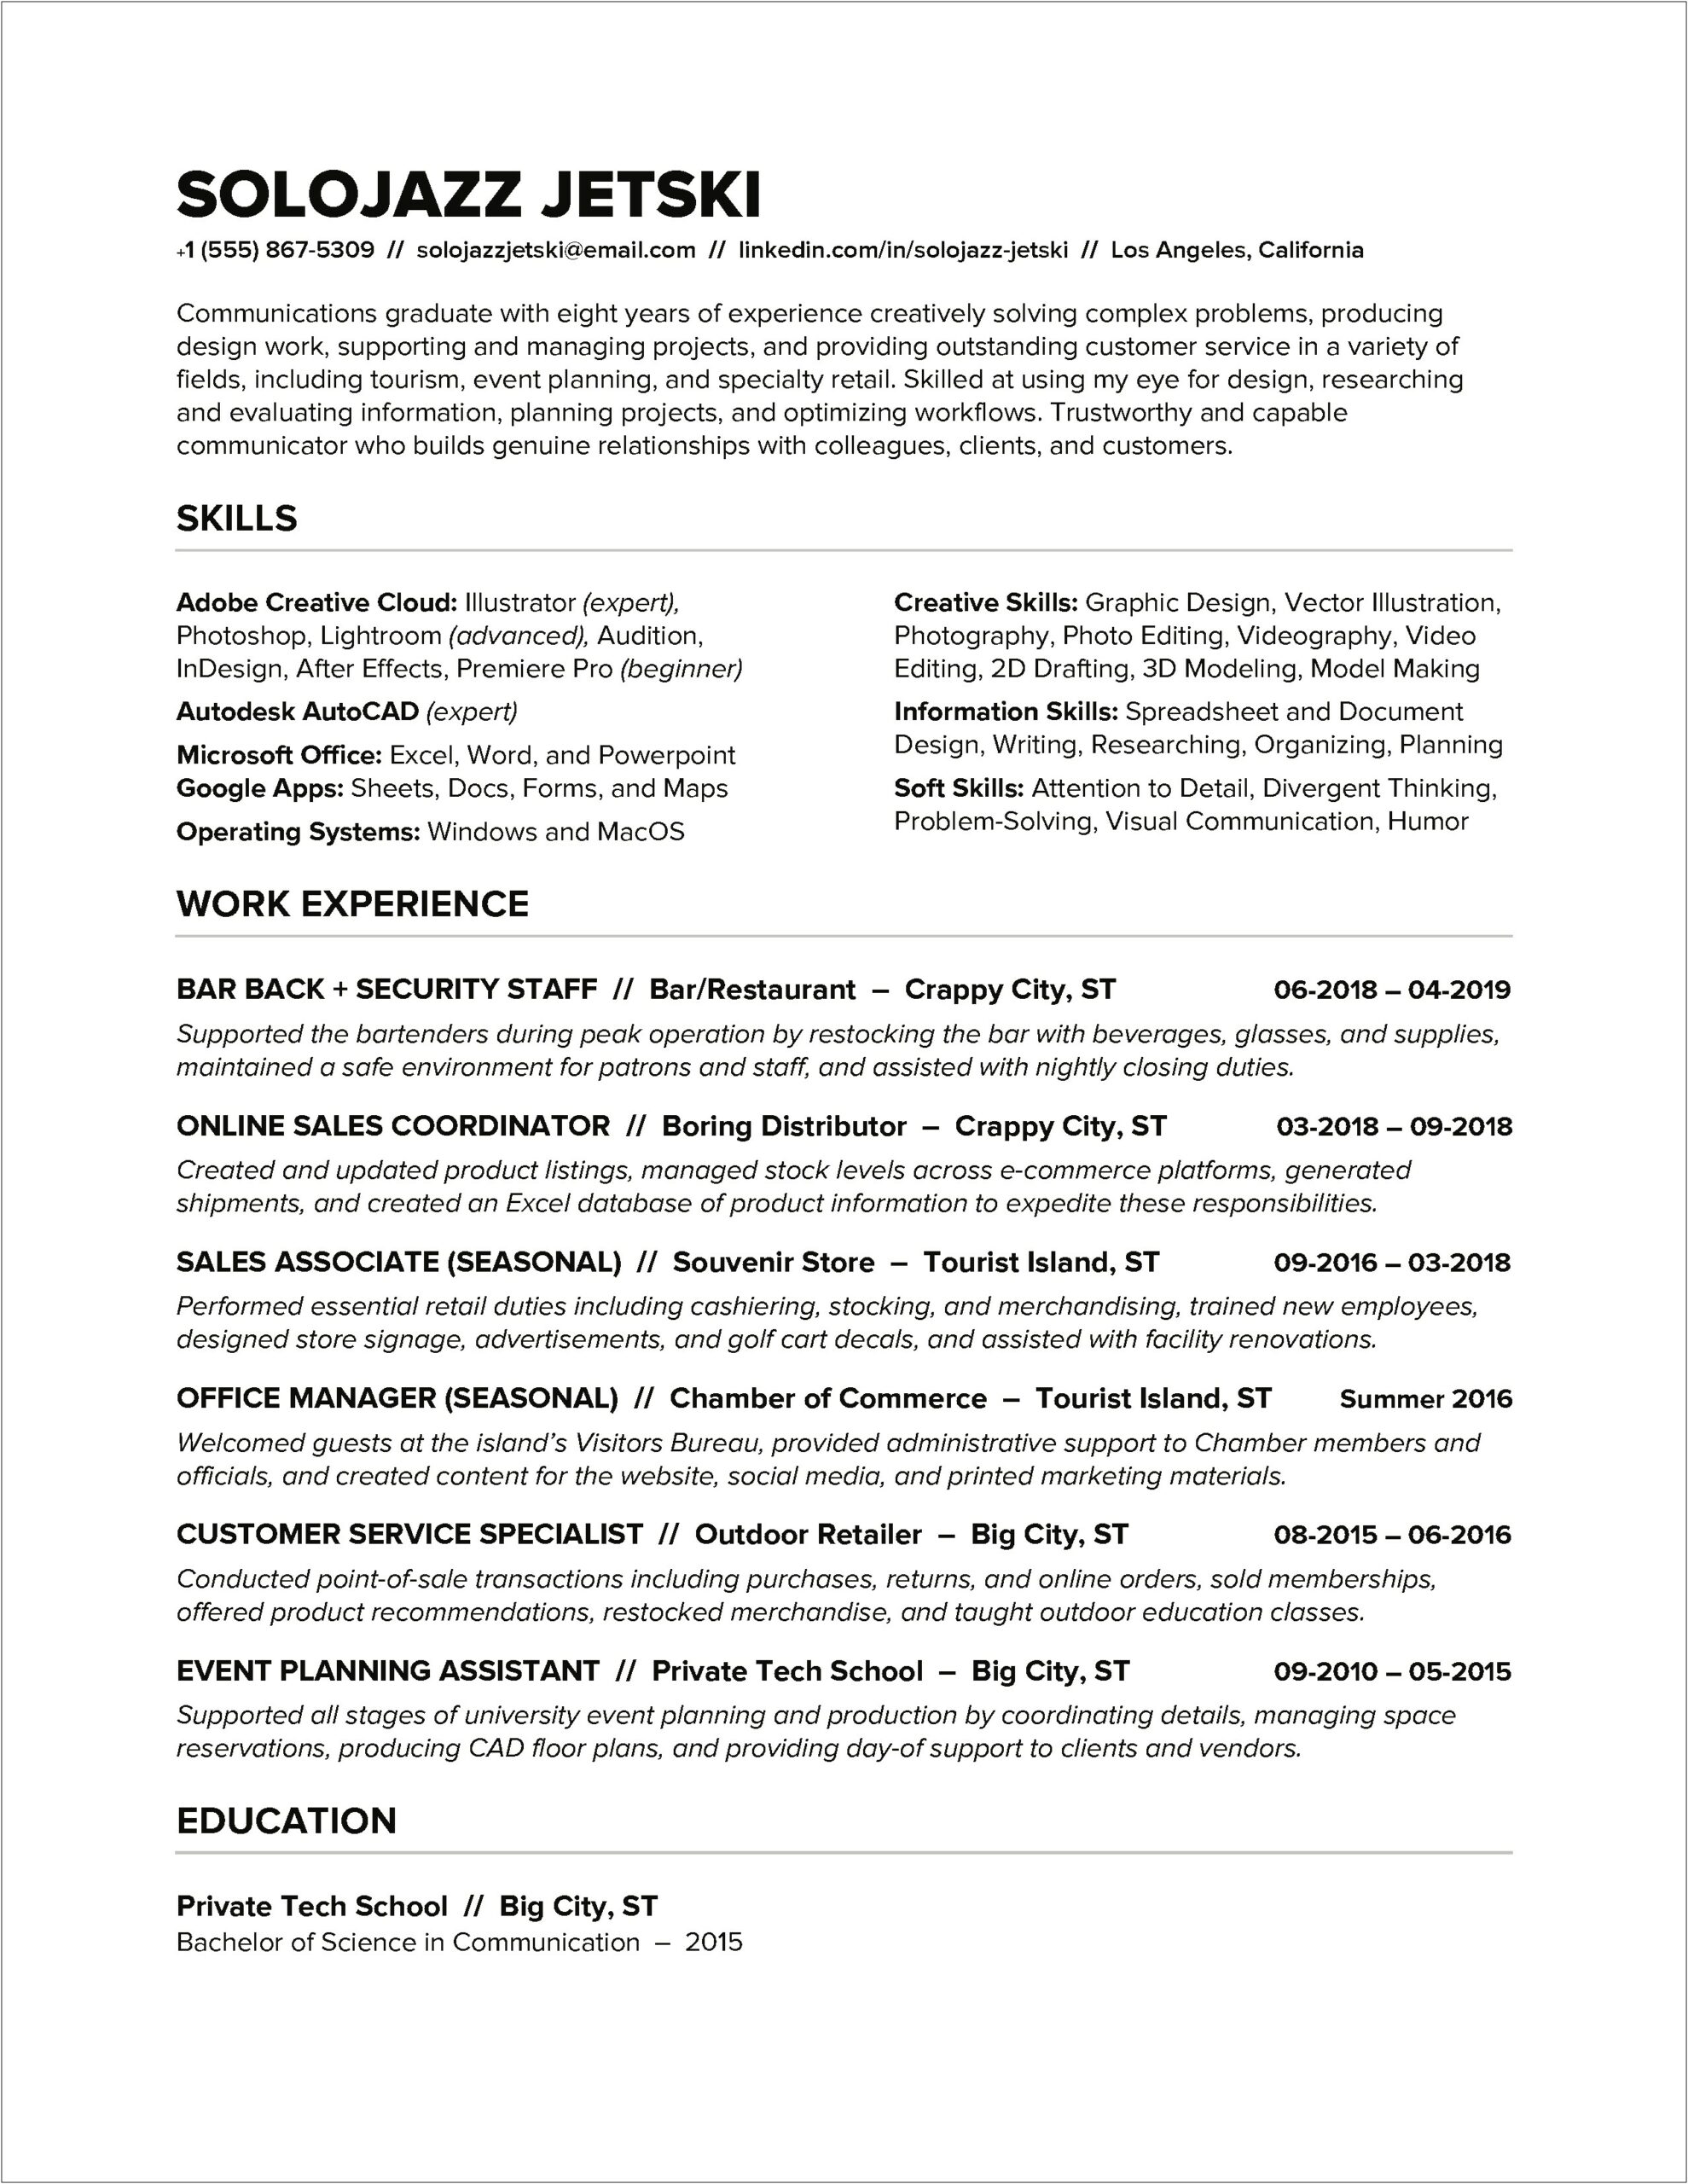 Continued To Gain Knowledge Resume Wording